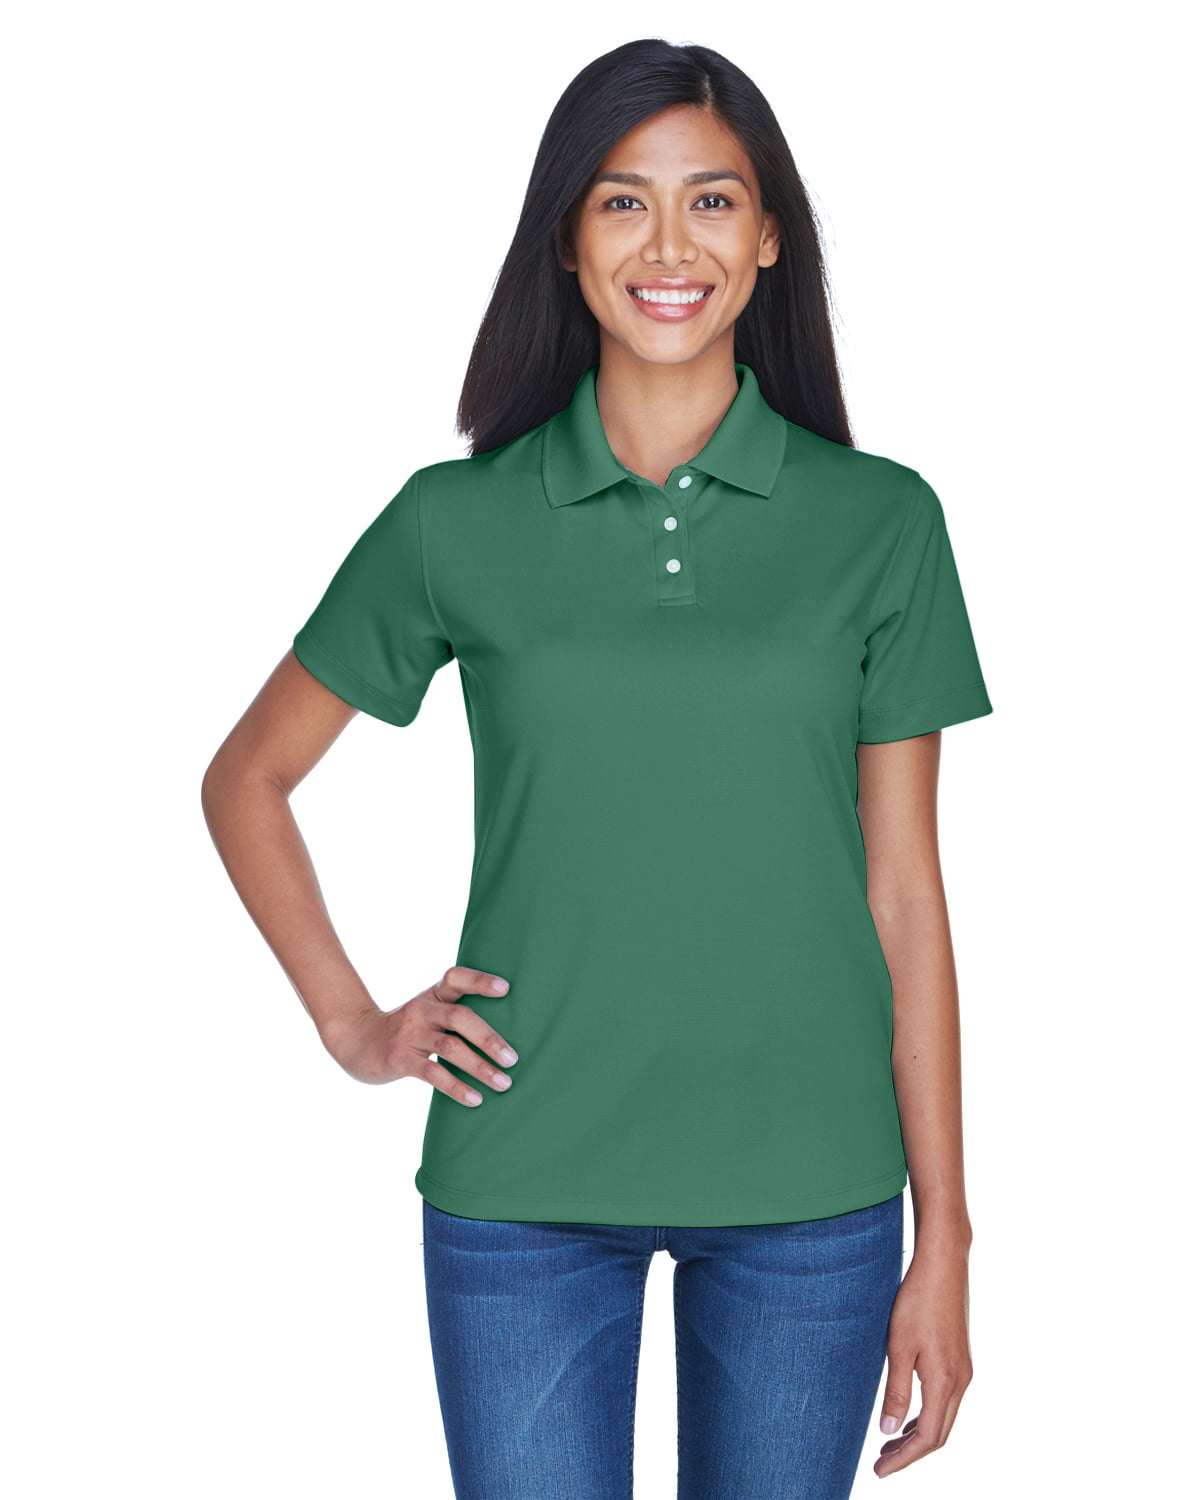 UltraClub Ladies Cool & Dry Stain-Release Performance Polo